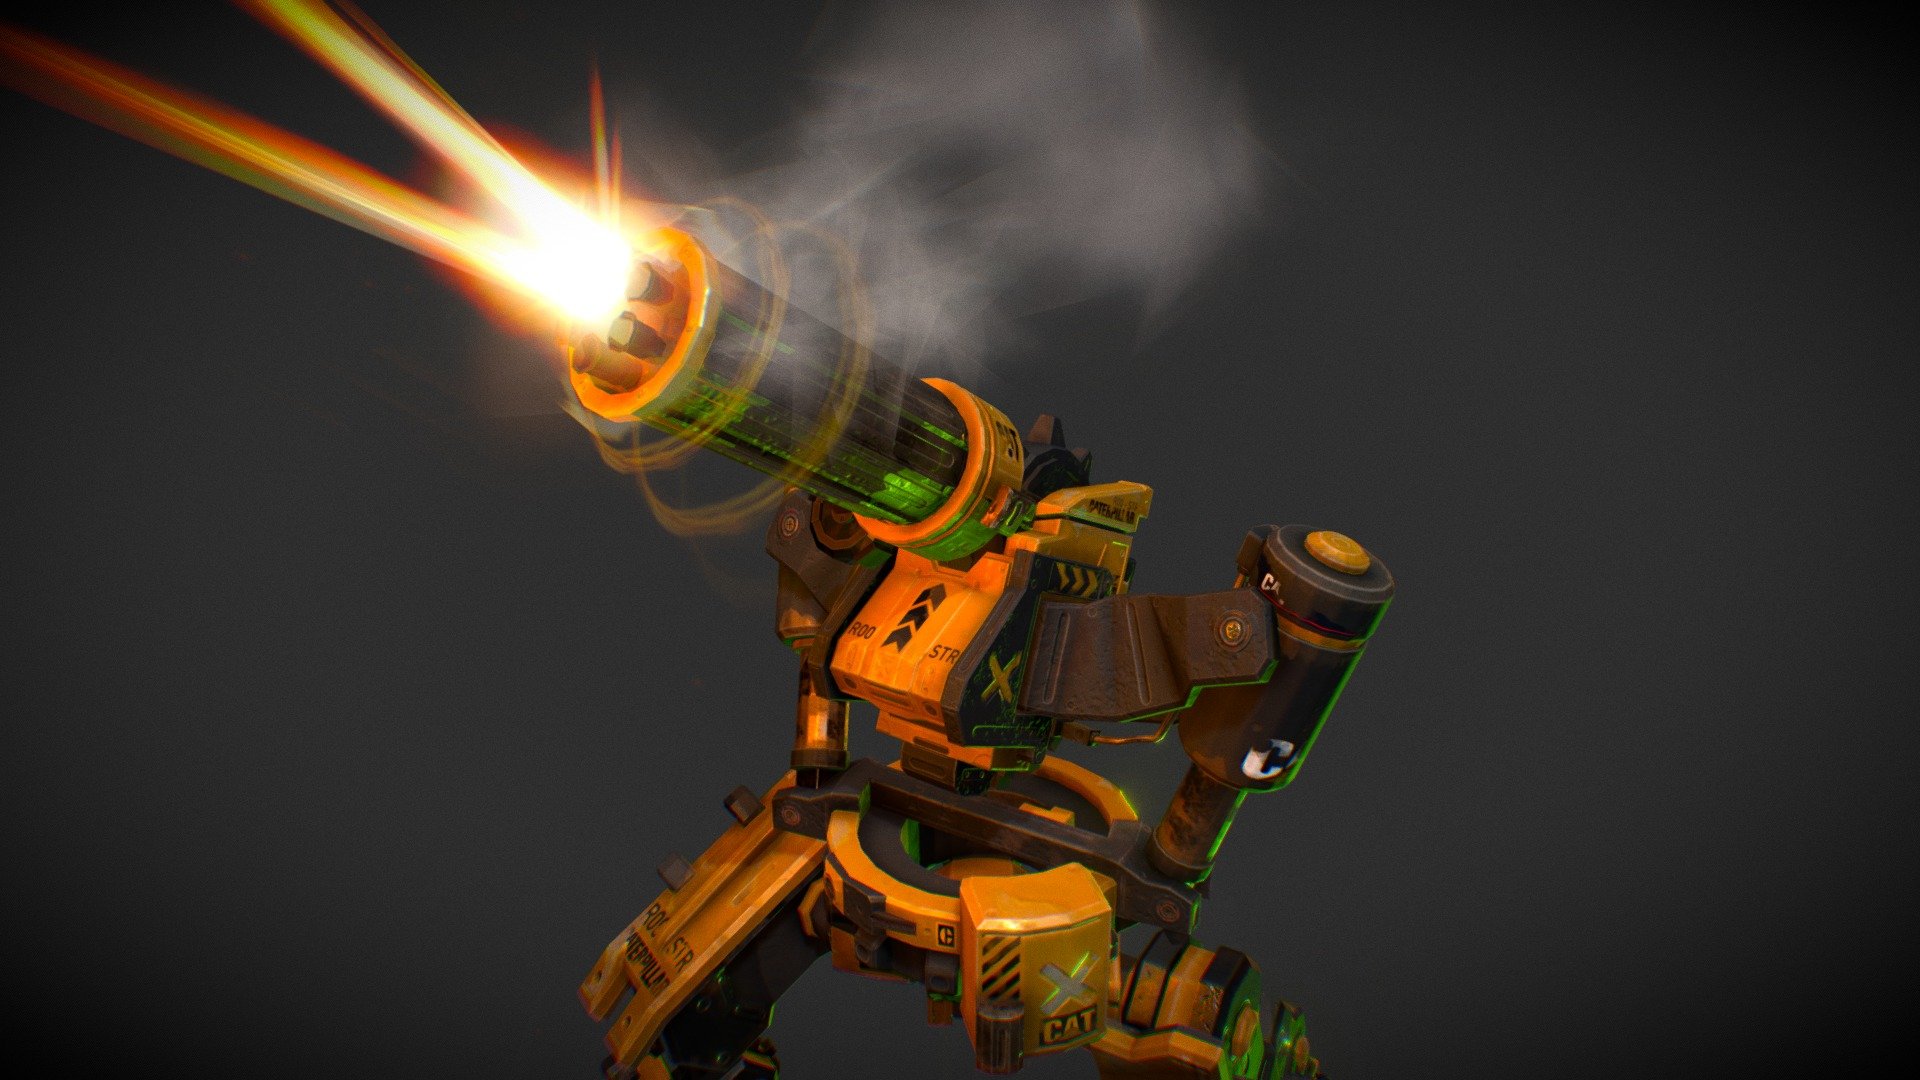 Personal project of a full pipeline game character. It is also a tribute to my Father and his work with tractor parts.

https://www.artstation.com/artwork/XWPvw - R00STR - 3D model by Gusto (@augustogoogle) 3d model